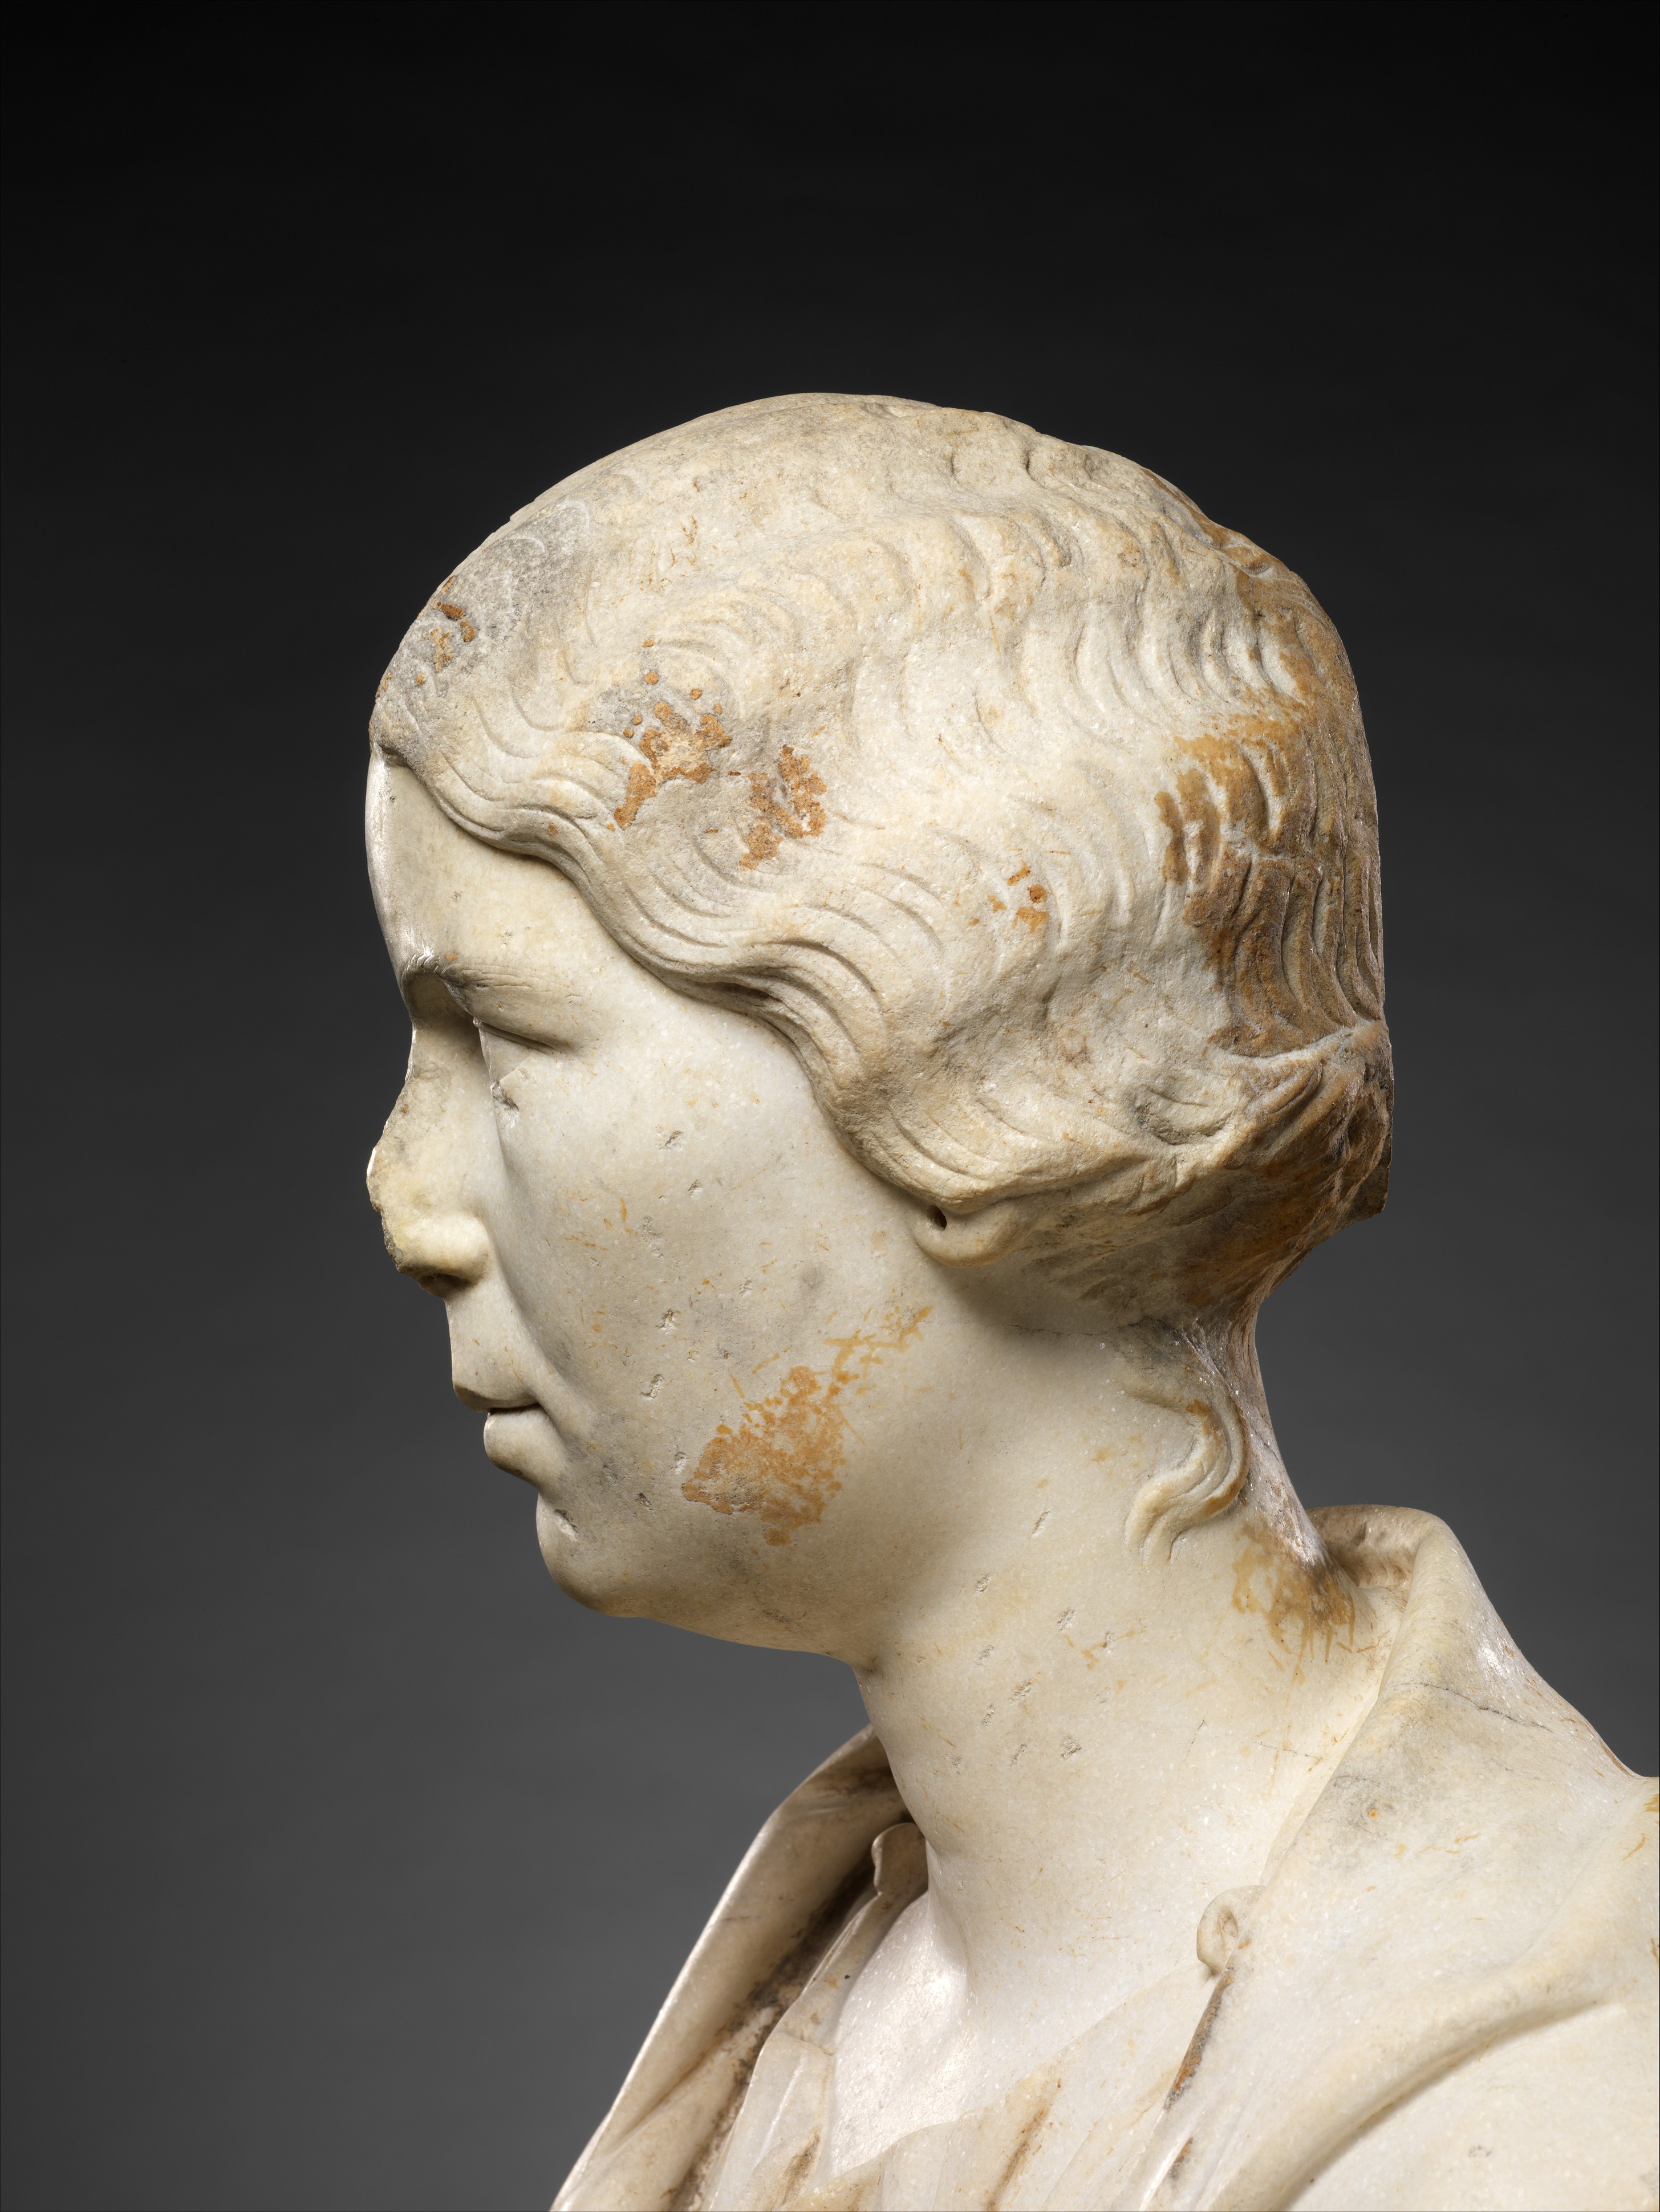 From Antiquity to Avant-Garde: A Historical Tour of Marble Busts